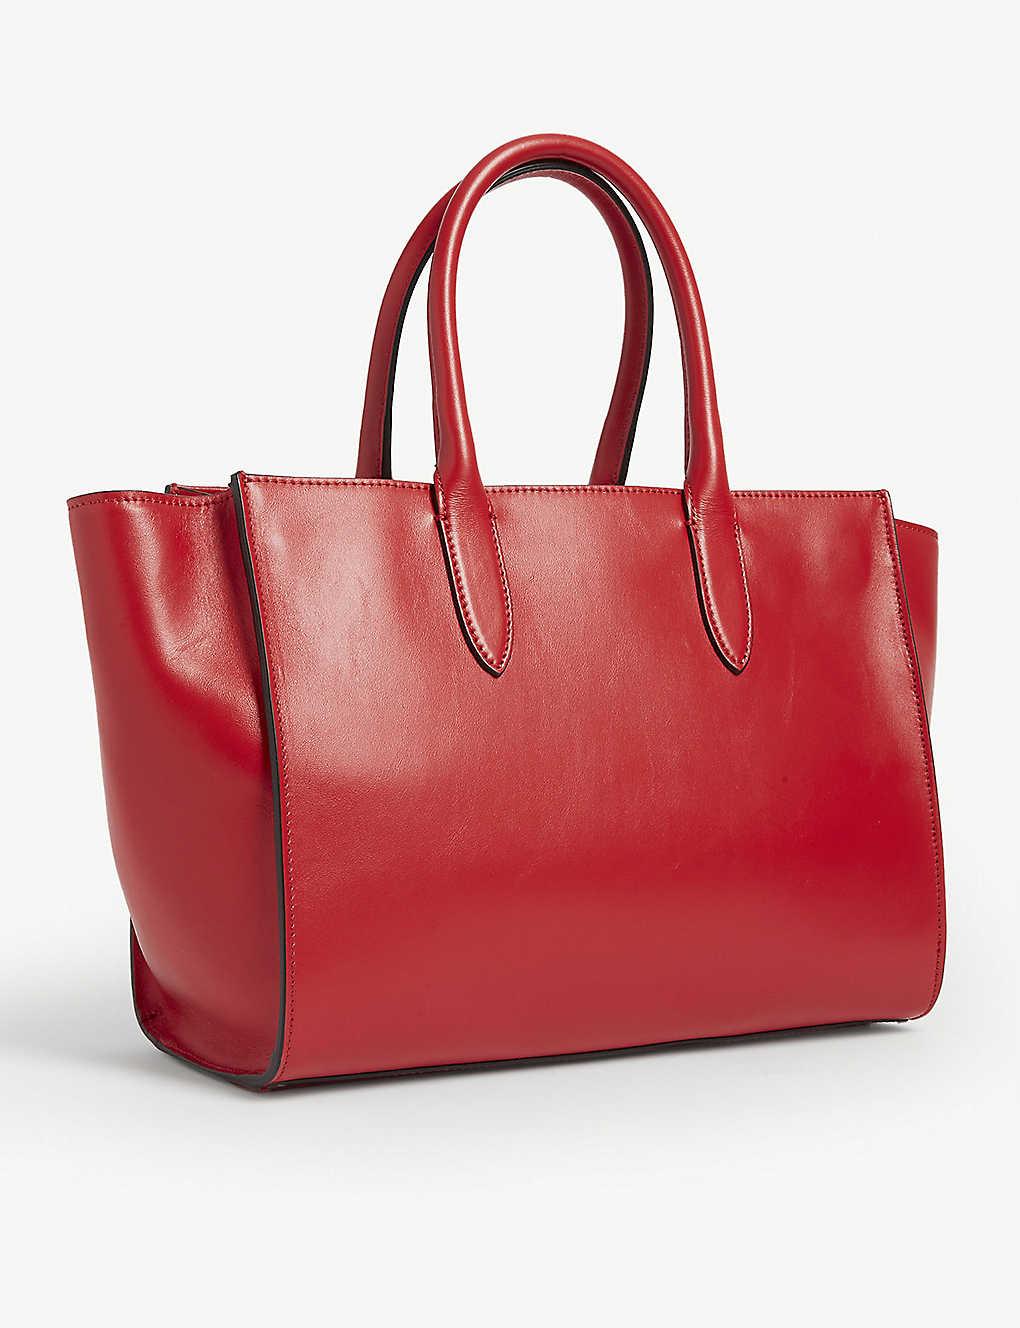 Zadig & Voltaire Leather Candide Medium Tote Bag in Passion (Red) - Lyst